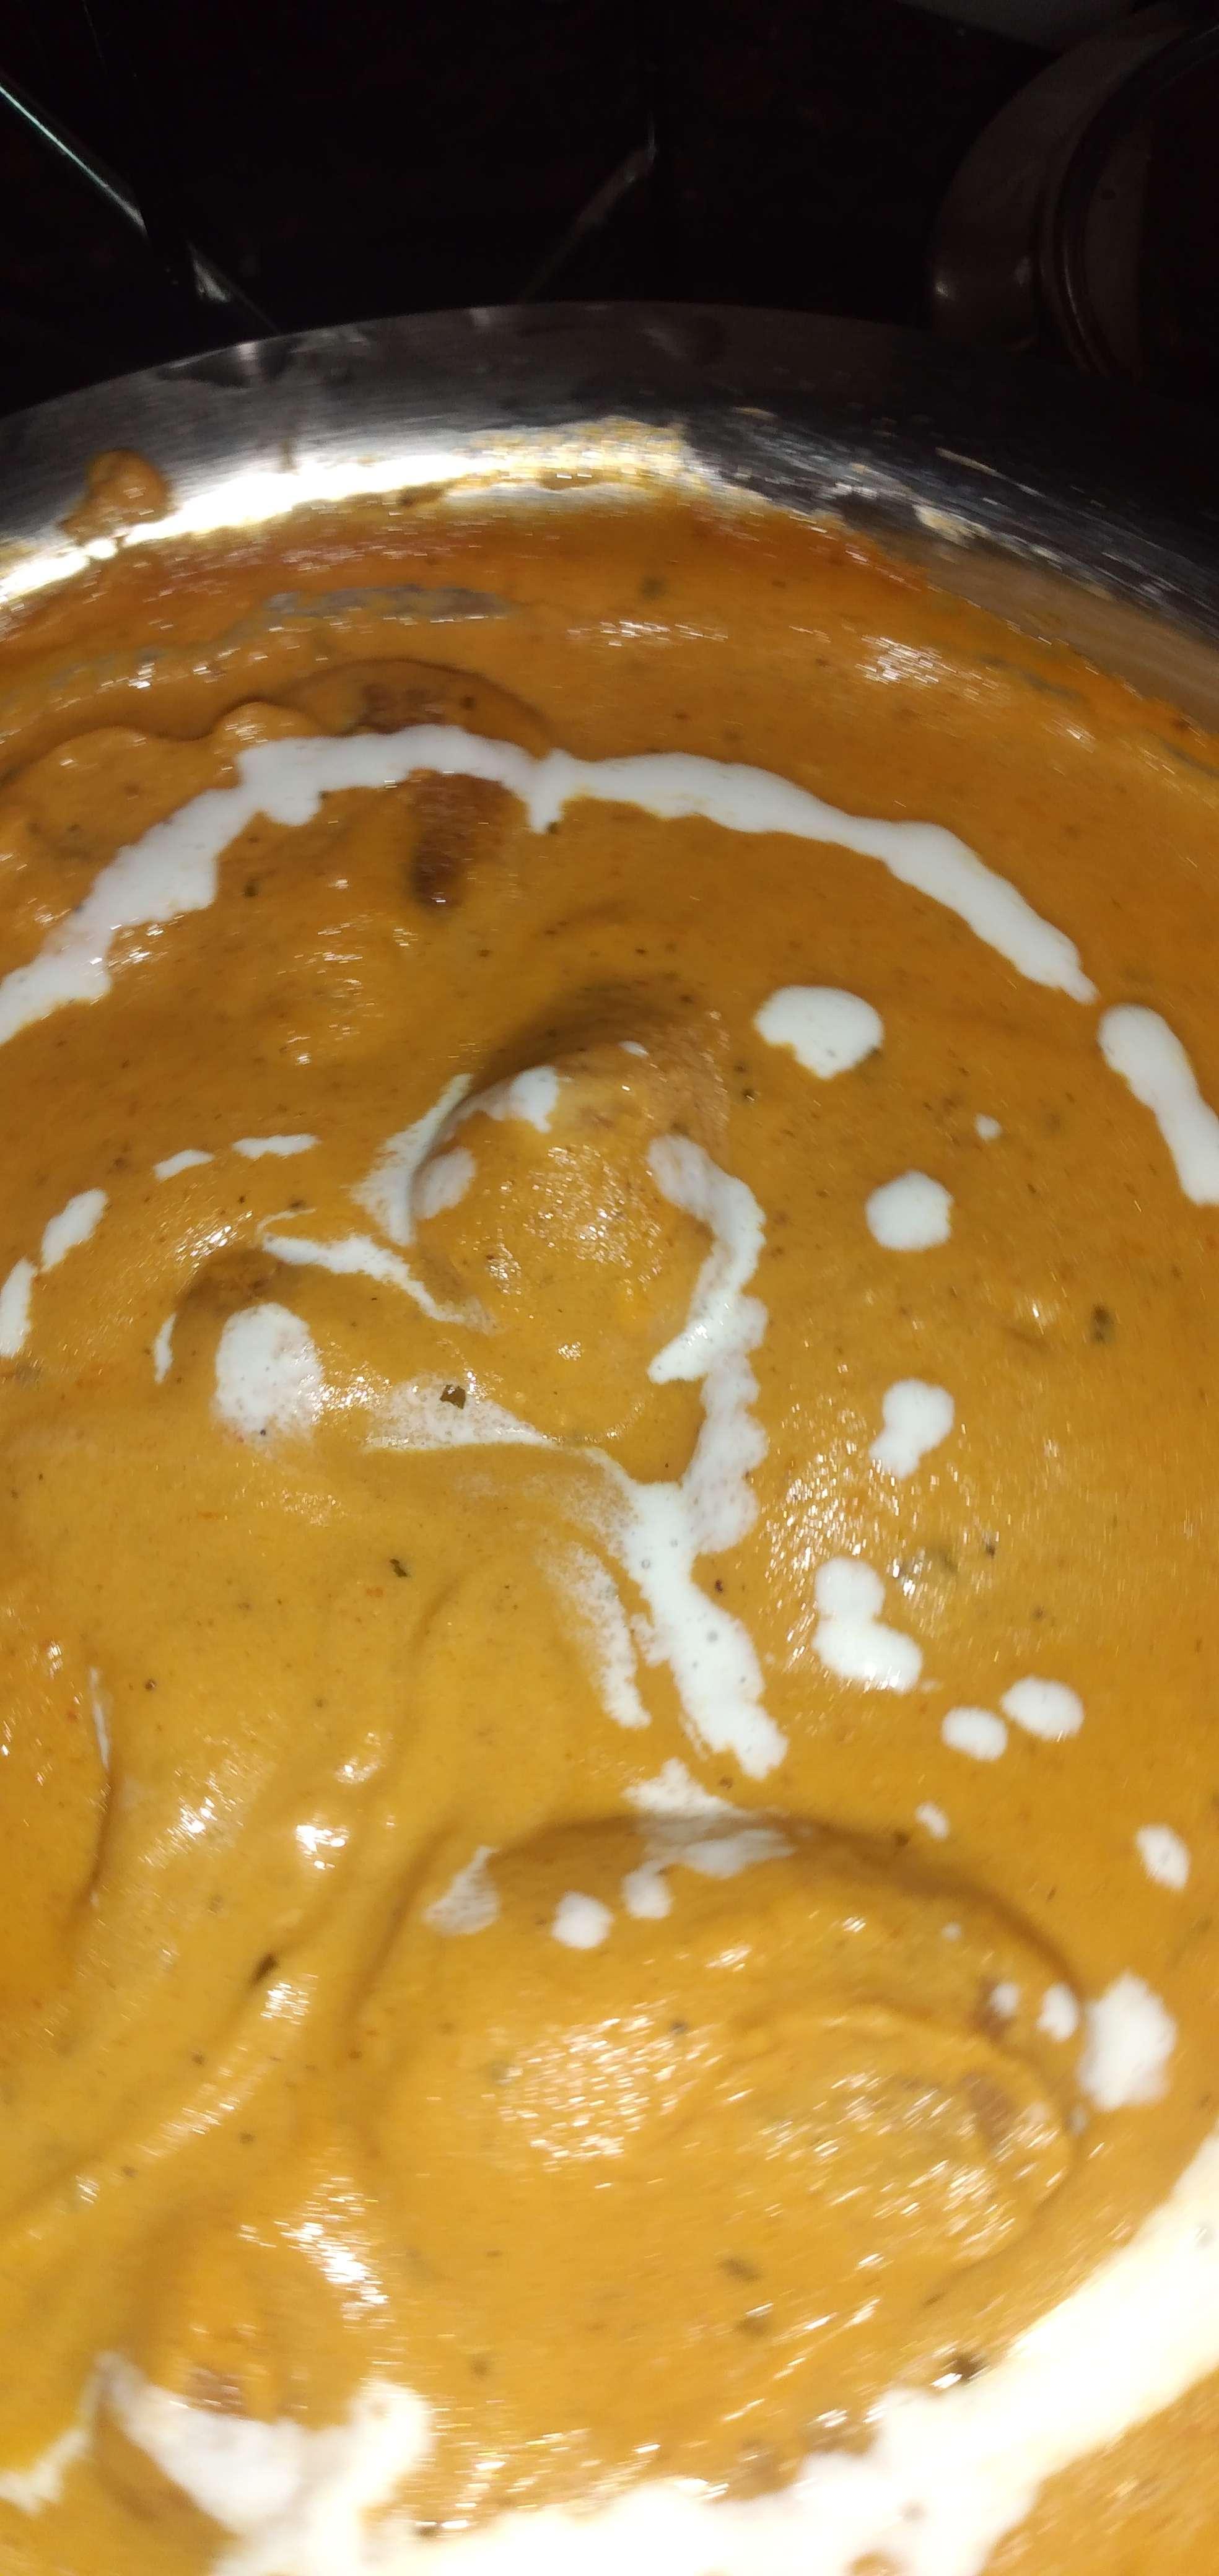 Tasty Malai Kofta cooked by COOX chefs cooks during occasions parties events at home